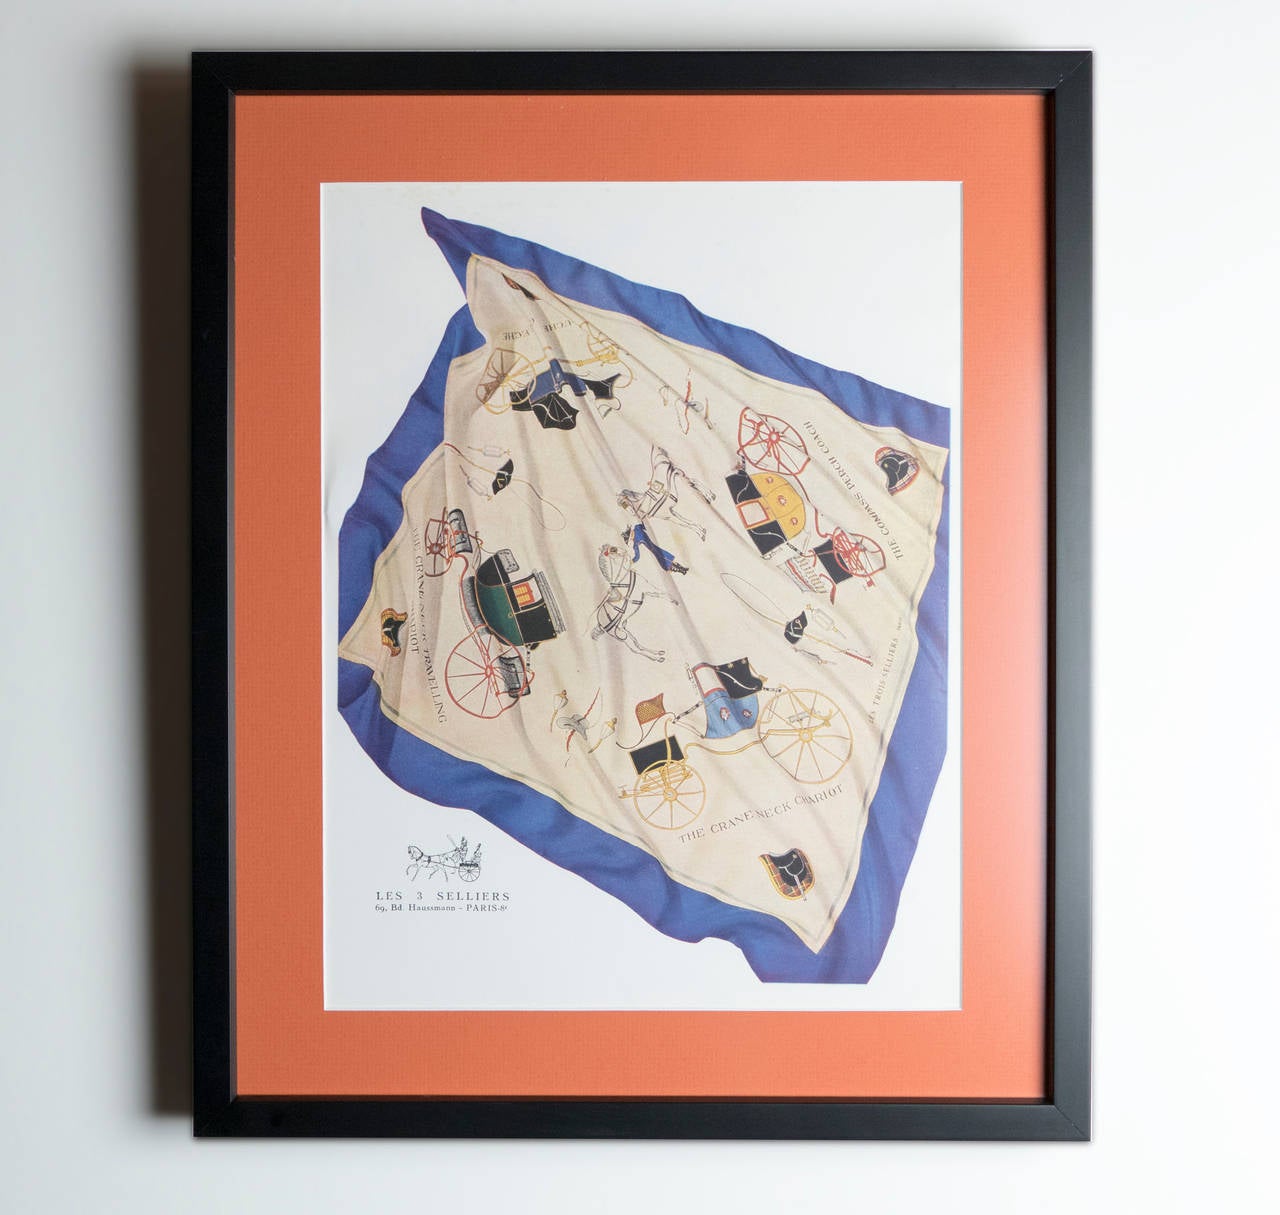 Original set of six Hermès advertisements from the 1920s to the 1960s
Newly Framed with a orange matte and black wooden frames.  
Sold as a set of six only.  One framed print has been changed from the original main image.  Items are located in